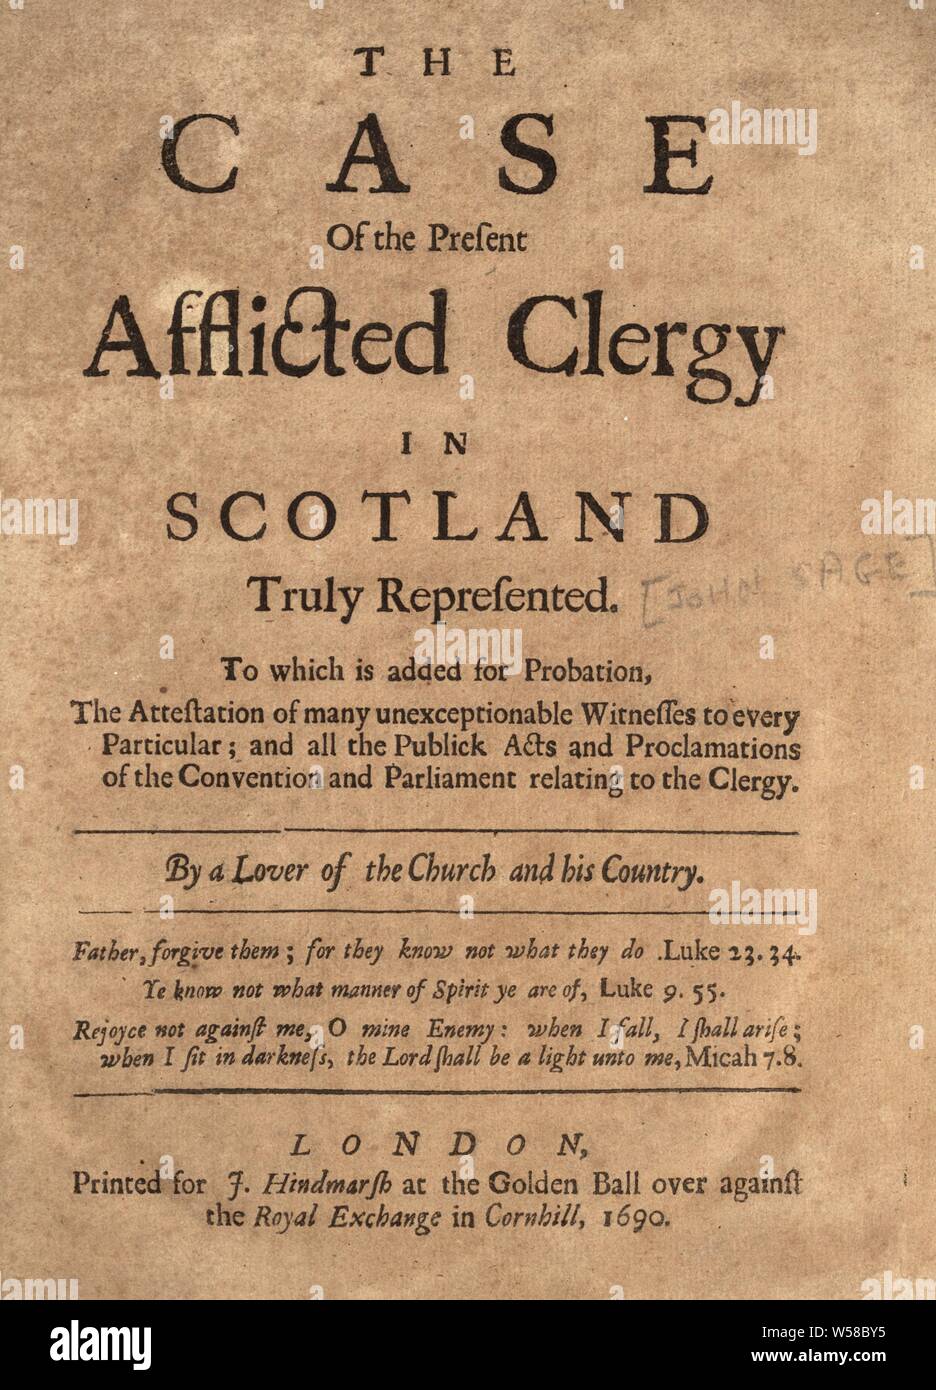 The case of the present afflicted clergy in Scotland truly represented. To which is added for probation, the attestation of many unexceptionable witnesses to every particular, and all the publick acts and proclamations of the Convention and Parliament relating to the clergy : Sage, John, 1652-1711 Stock Photo